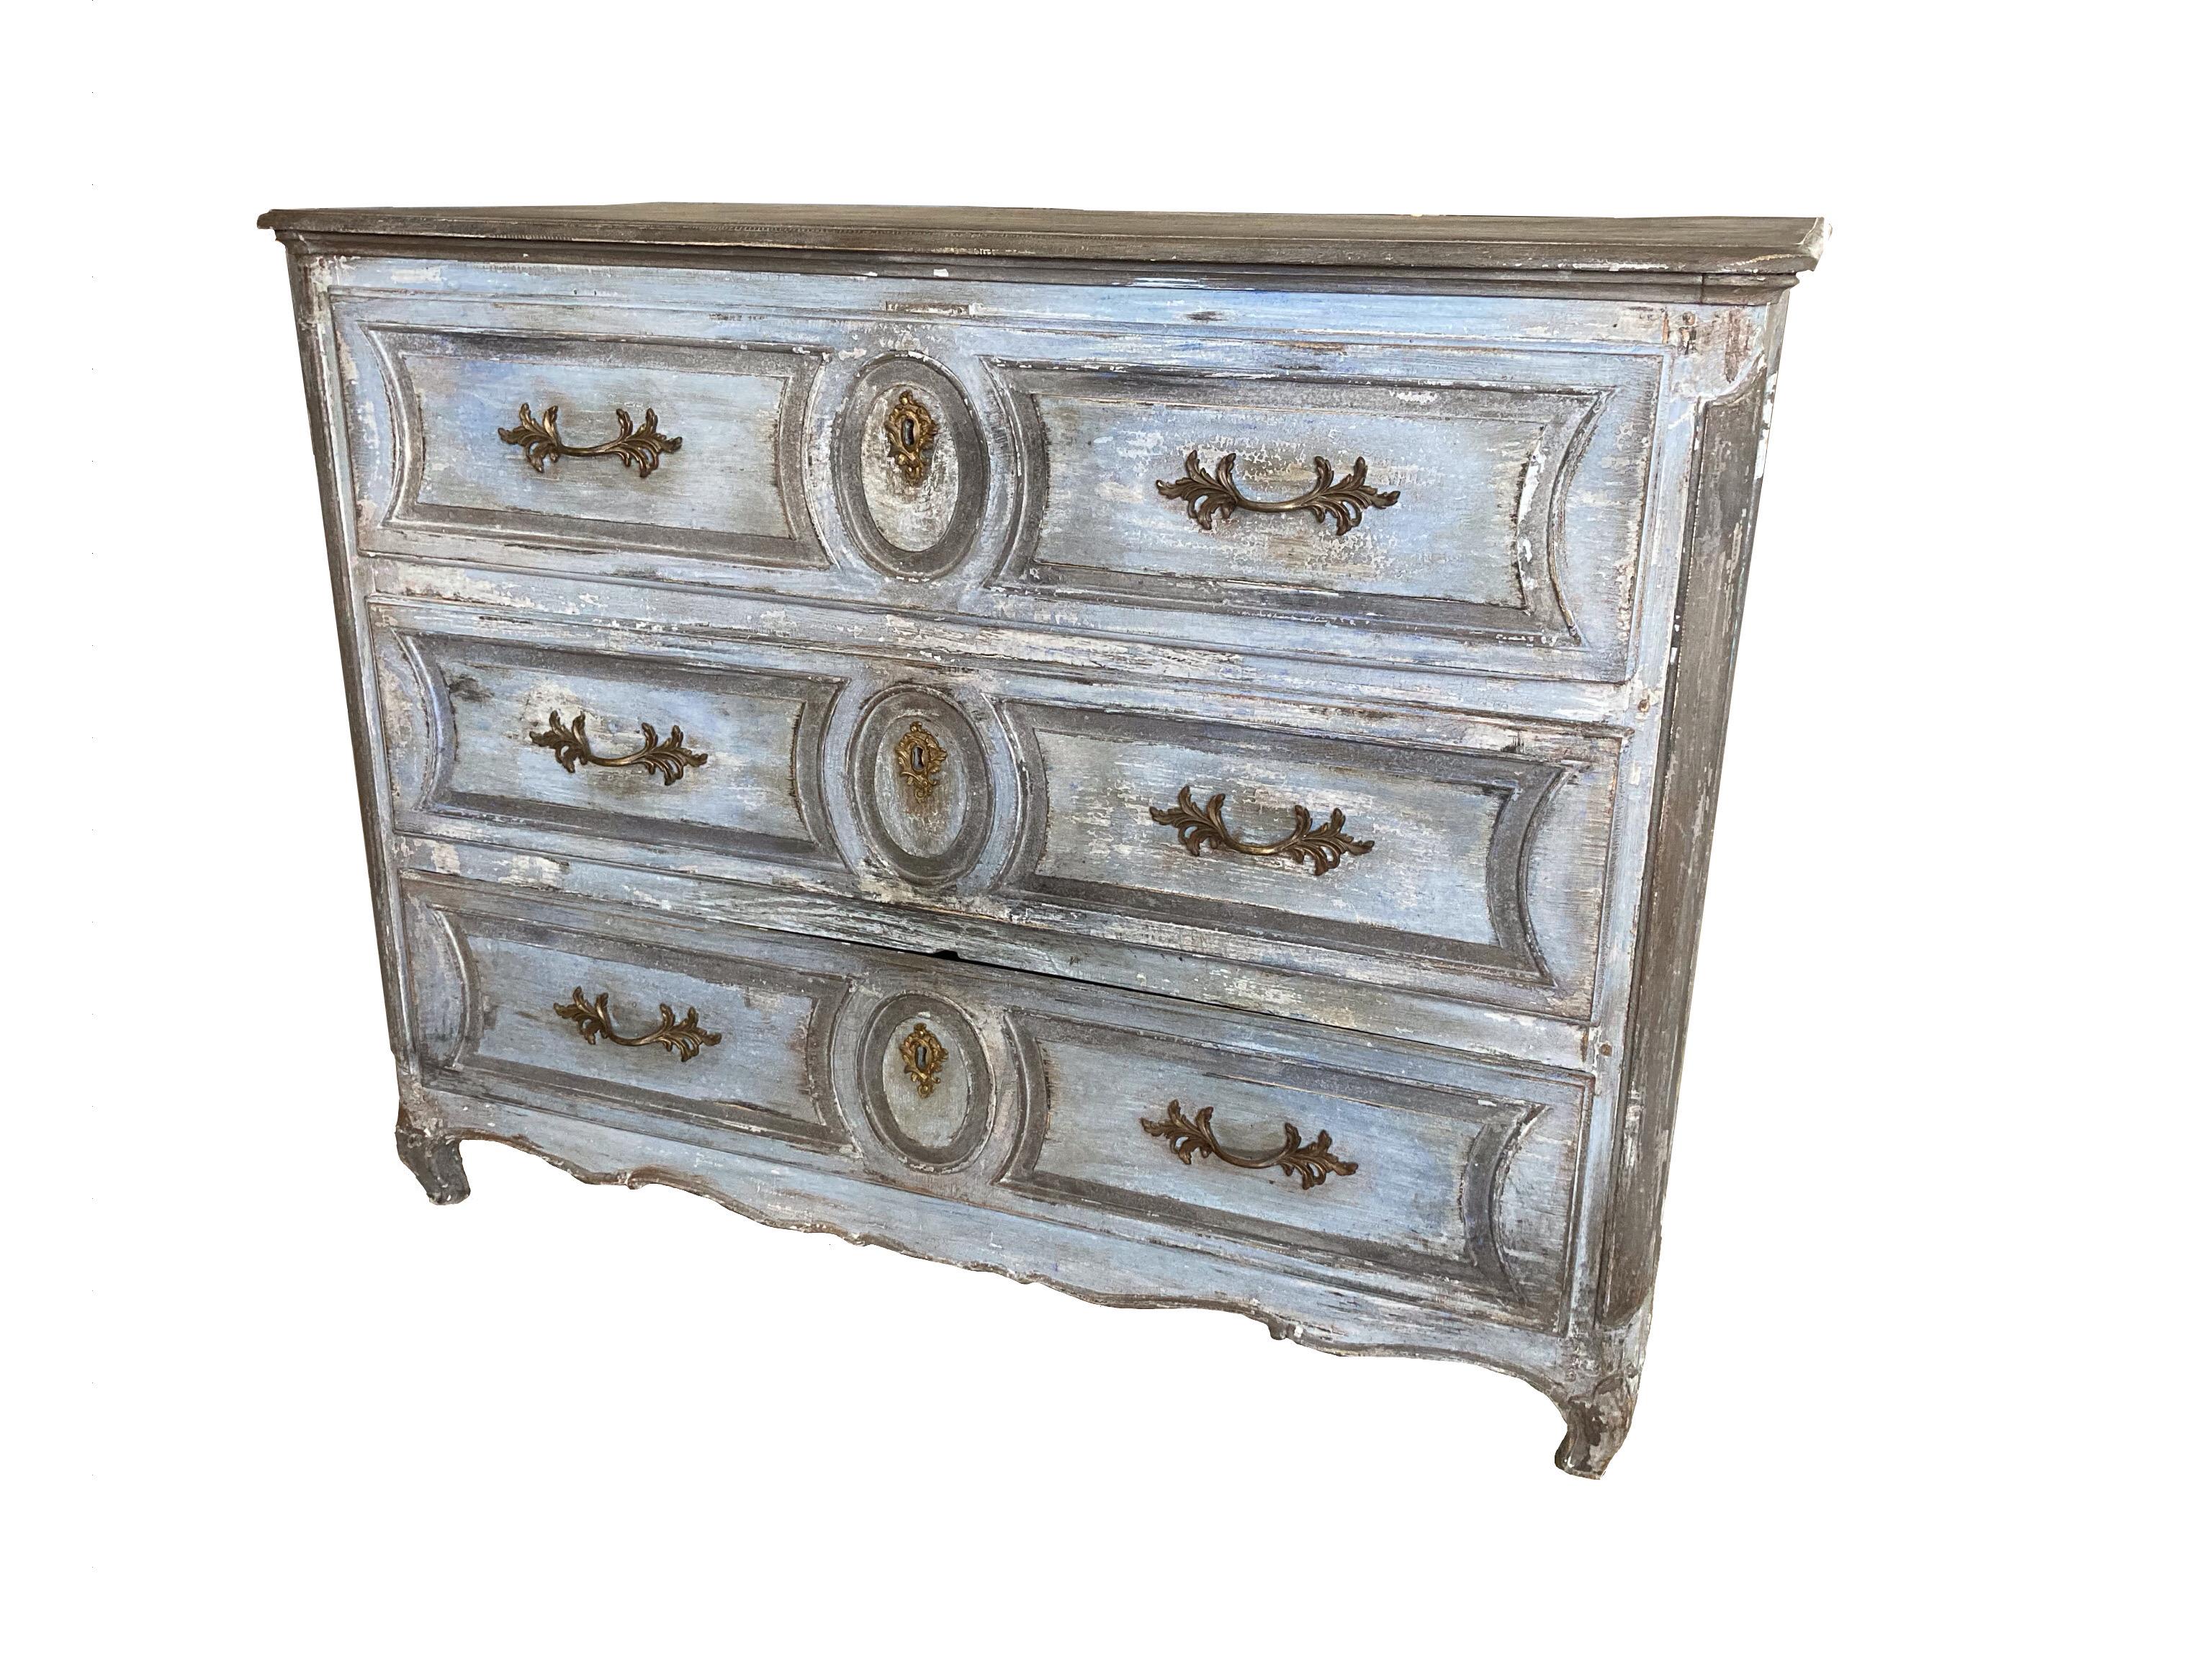 Painted Louis XV commode handmade in France in the mid 1700s using oak and pegged construction. The commode is a beautiful period piece with handmade large dovetail joints in the drawers as well as beautiful hand carved molding and details. The